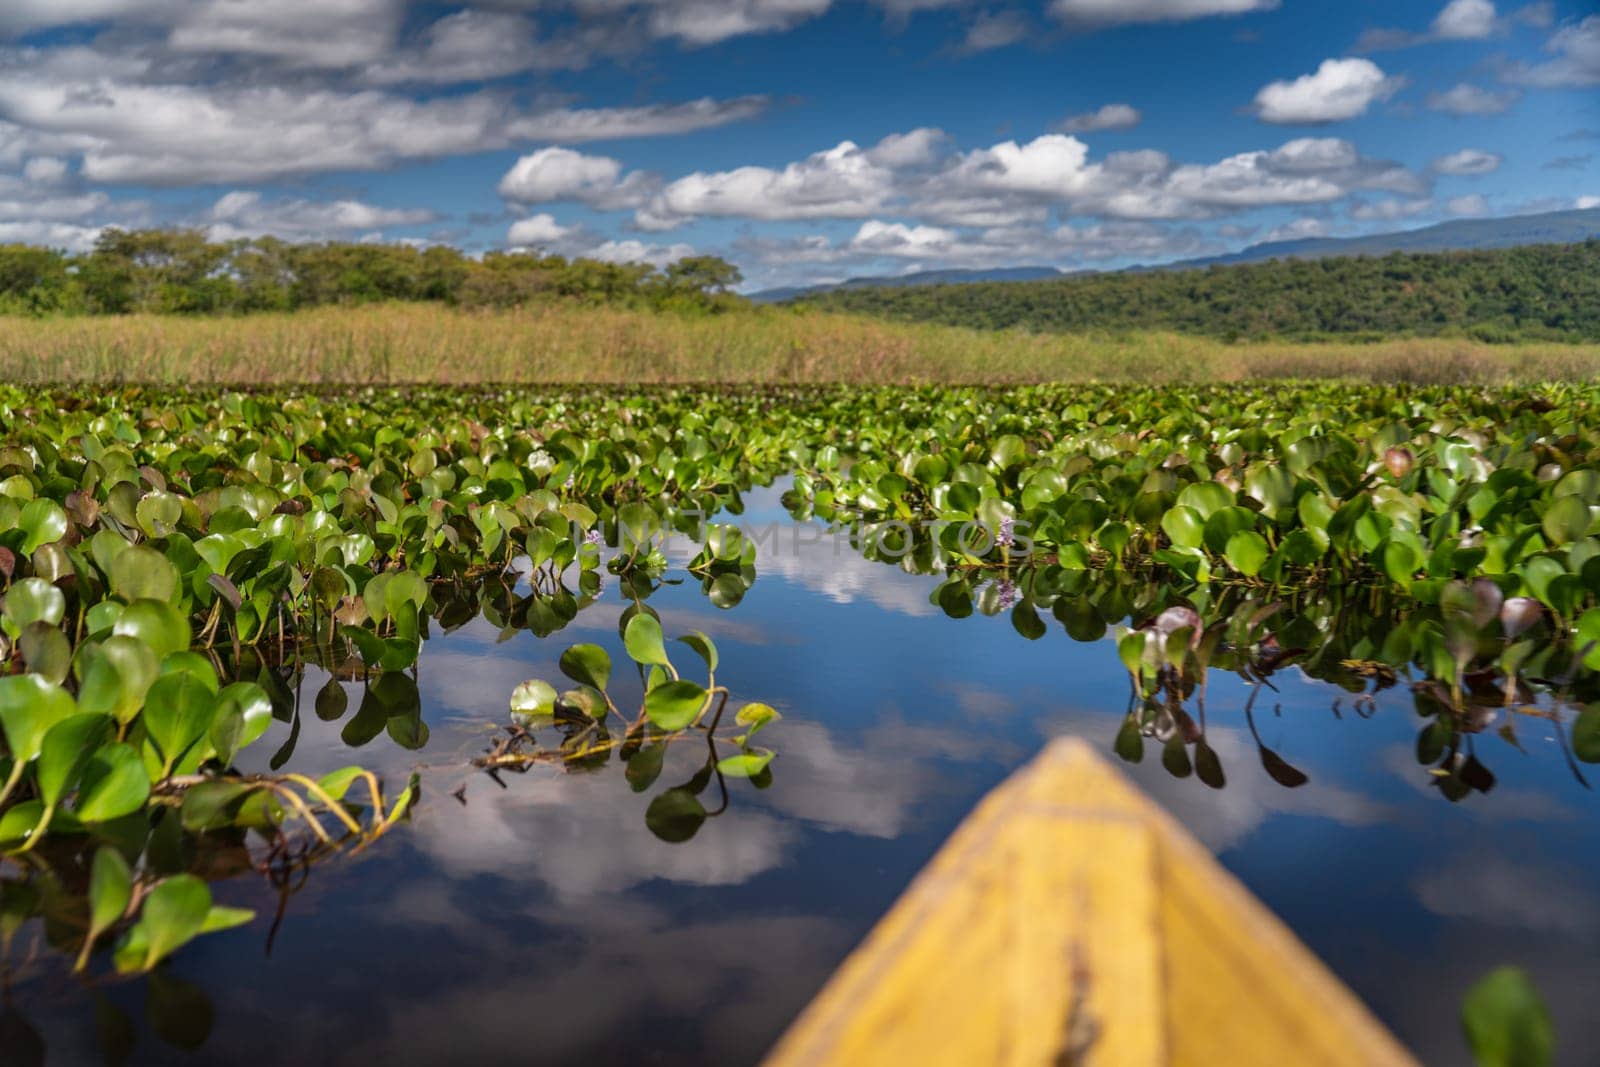 Kayaking in peaceful waters with colorful water lilies under a clear blue sky.